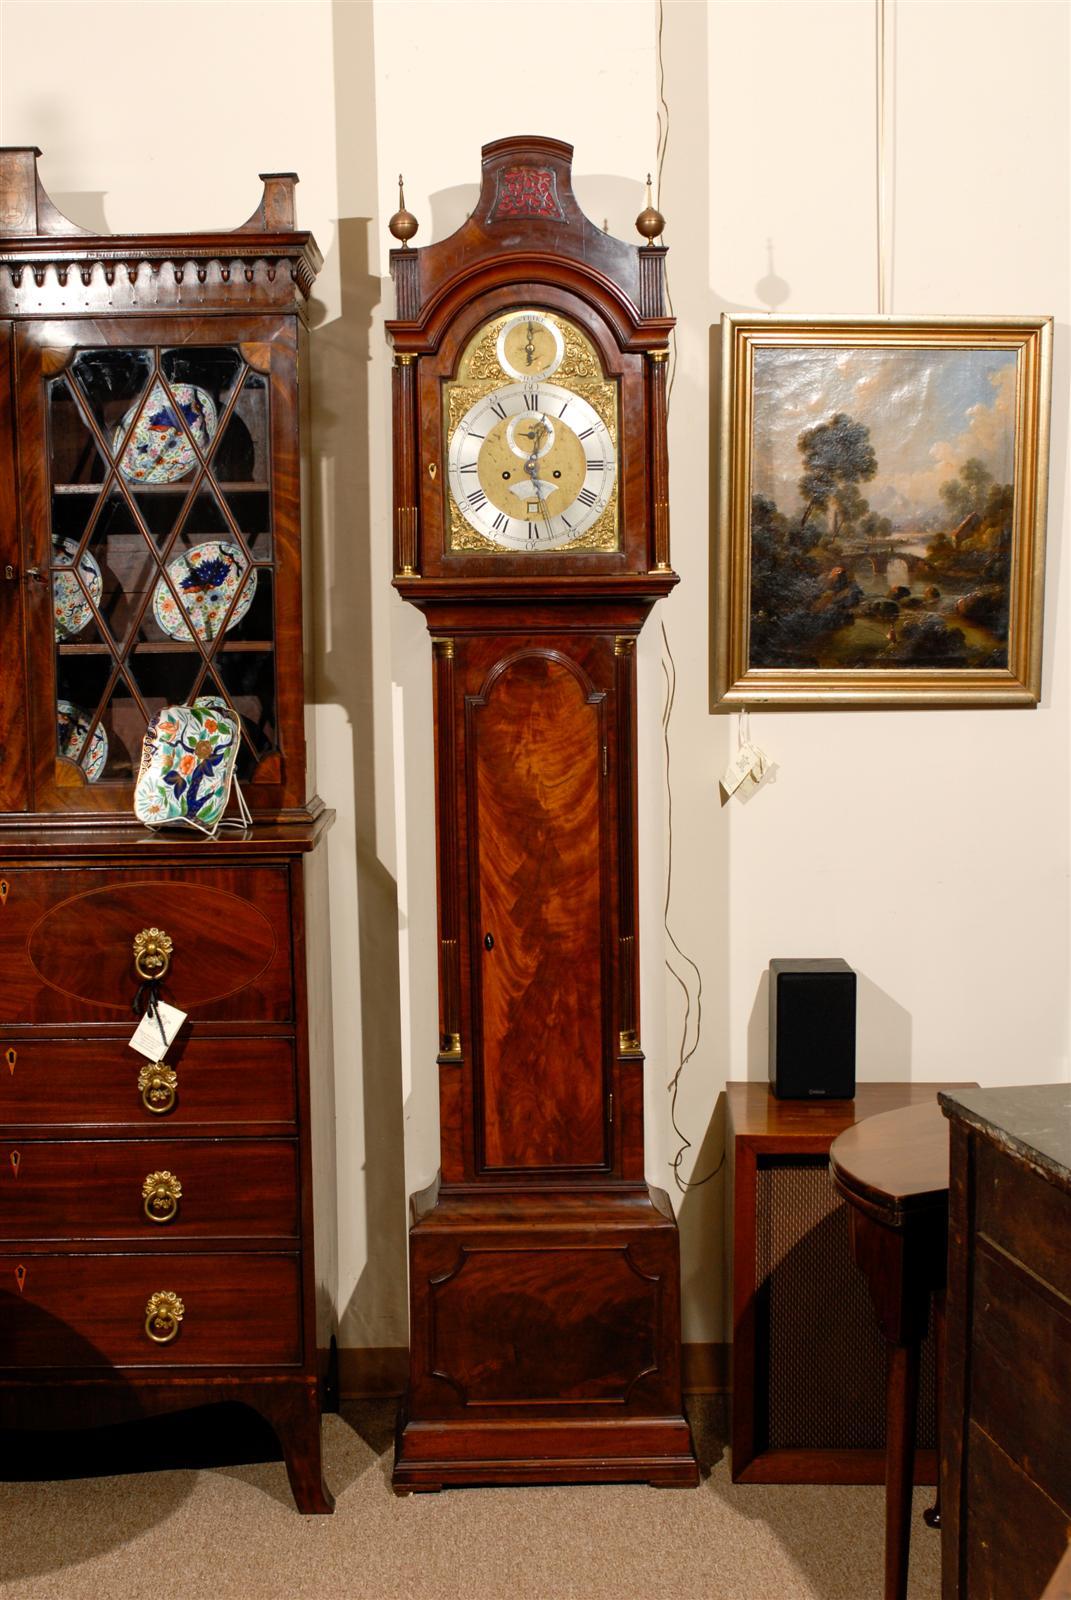 18th century English mahogany tall case clock with brass finials and column detail, brass and steel face signed 